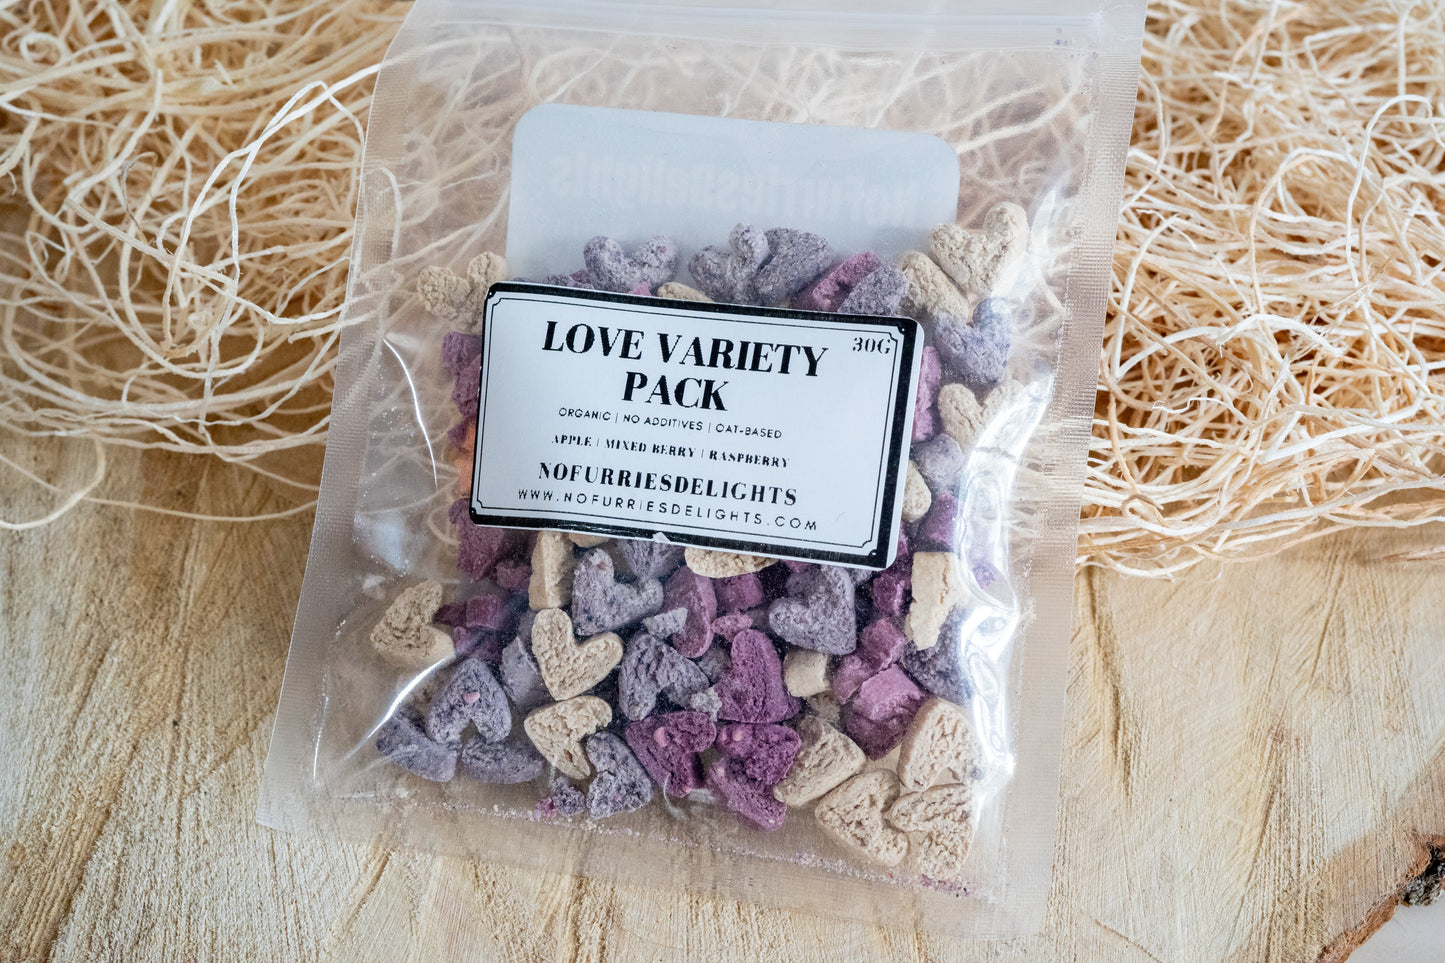 Love variety pack is heart shaped bites made with apples, mixed berries and raspberries for small pets and birds.